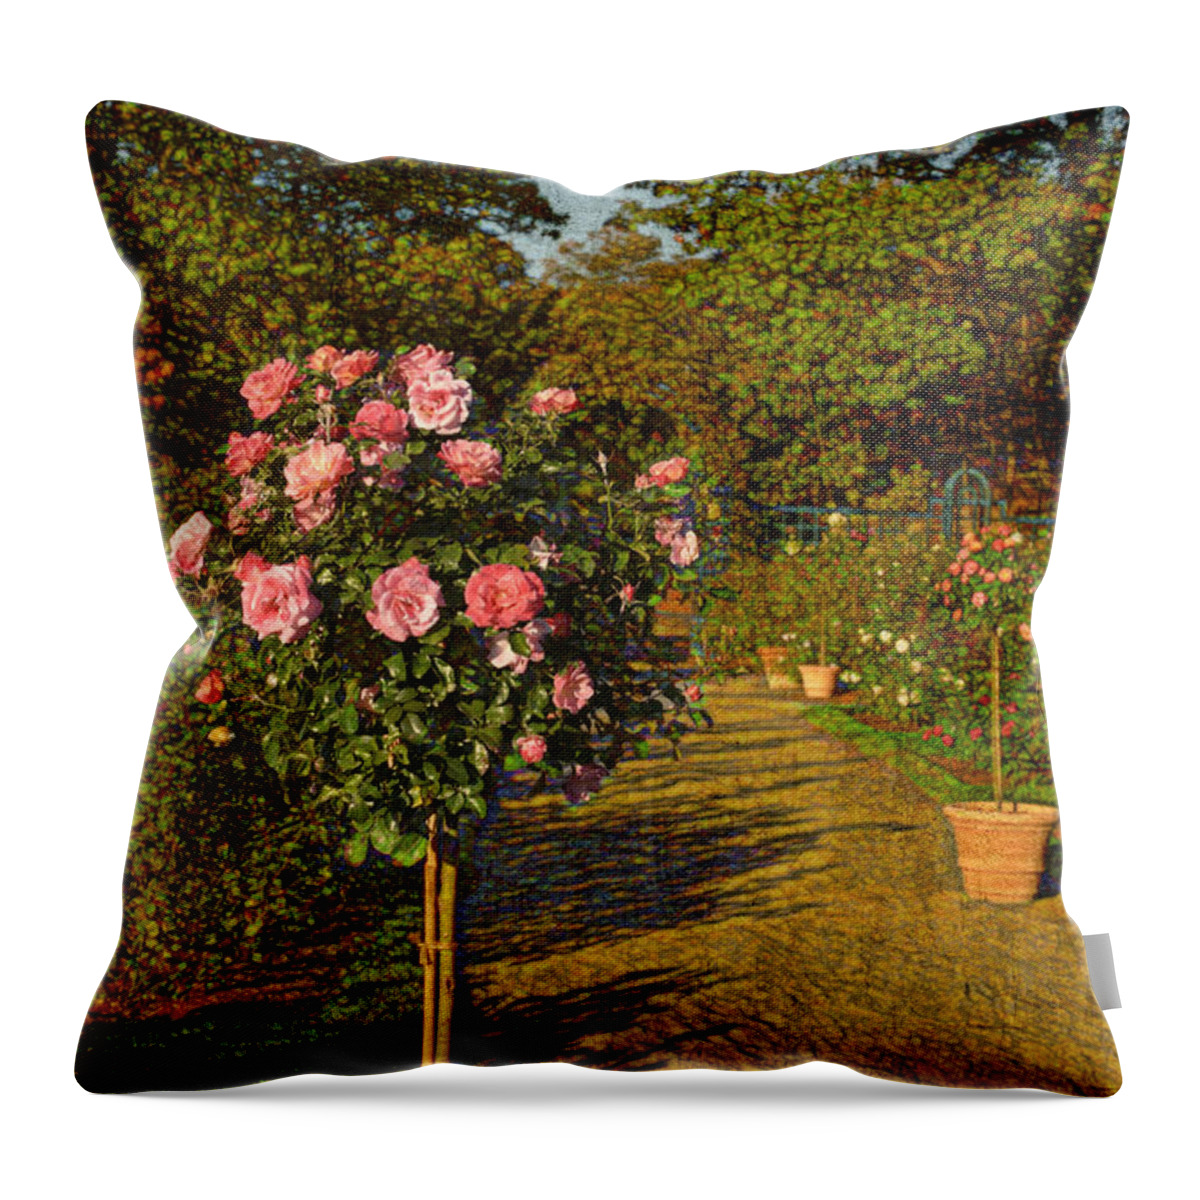 Nyc Throw Pillow featuring the photograph Roses in the Garden by Marianne Campolongo